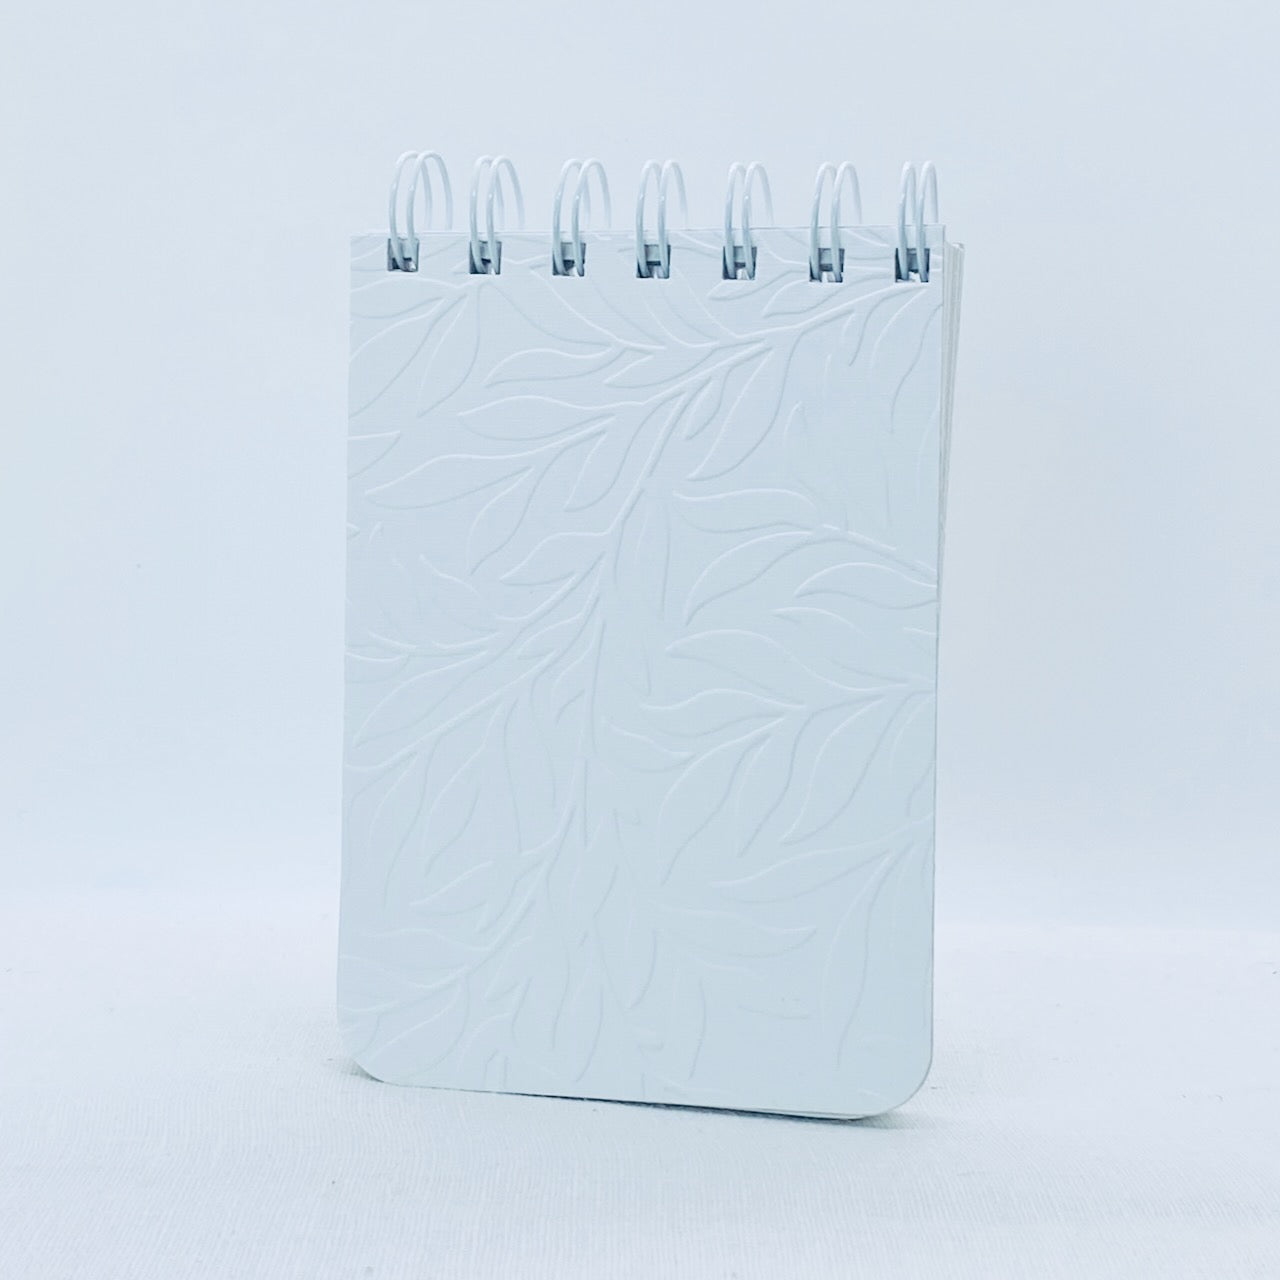 Floral Mini Note Pad (3.5 x 5) - Gallery360 Designs